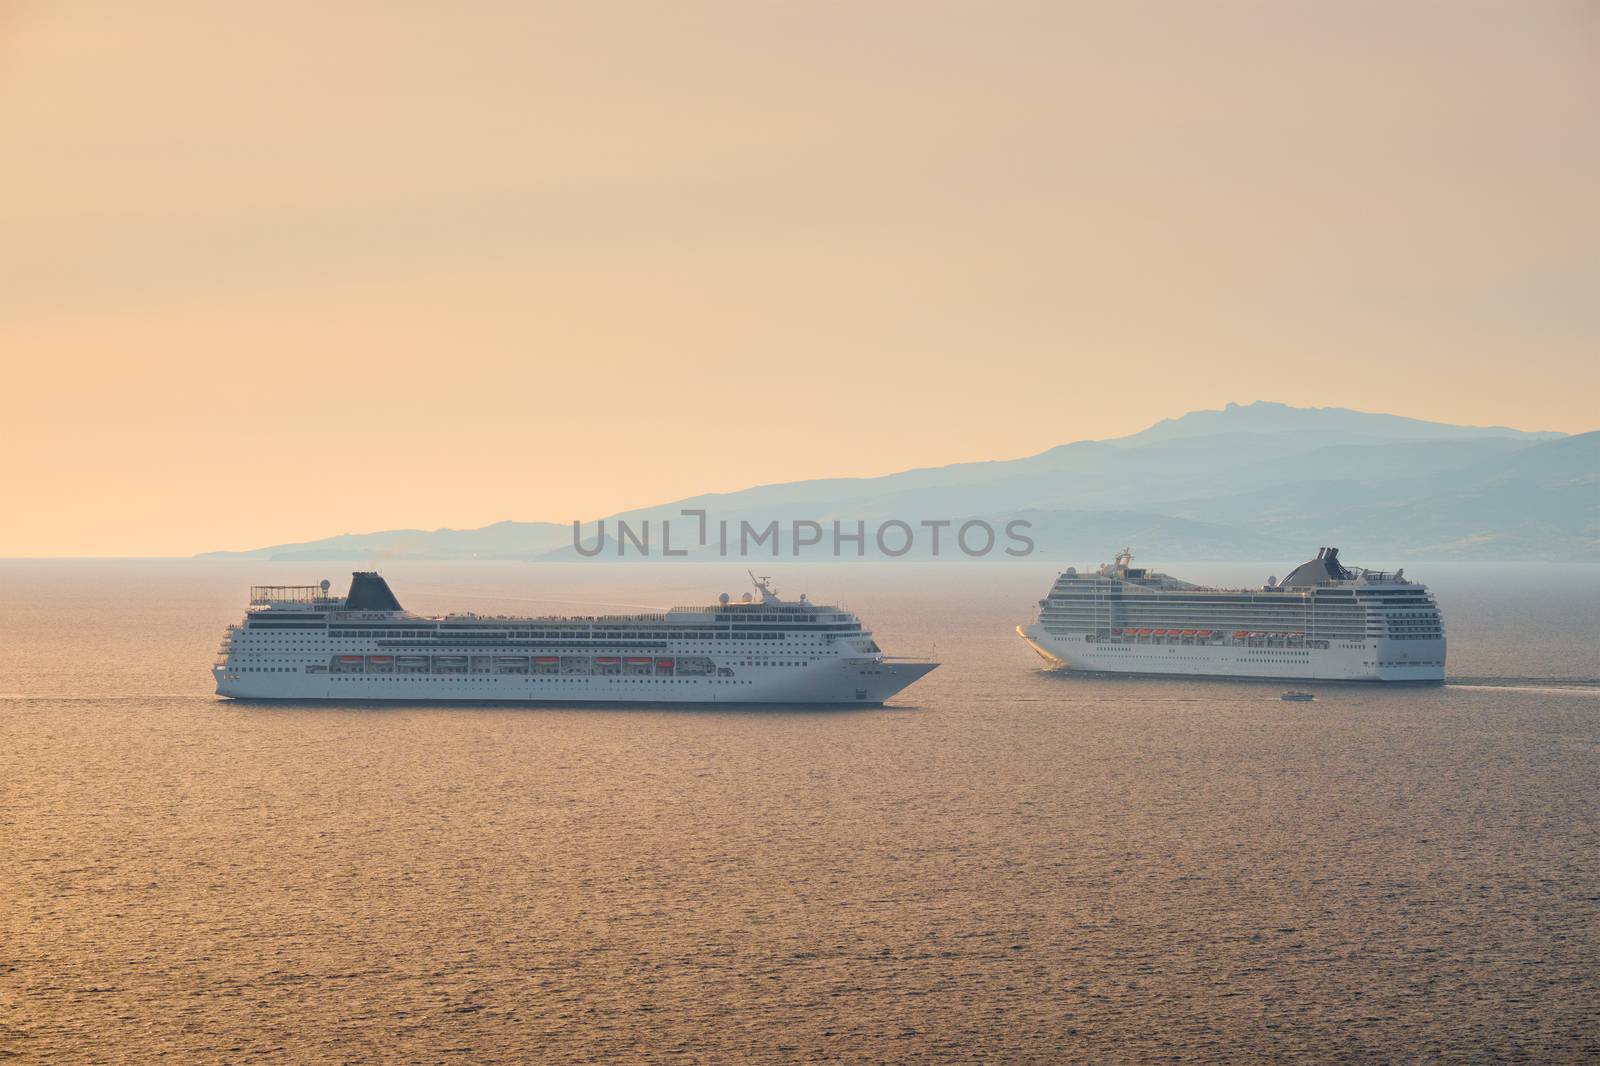 Cruise ships in Aegean sea on sunset by dimol